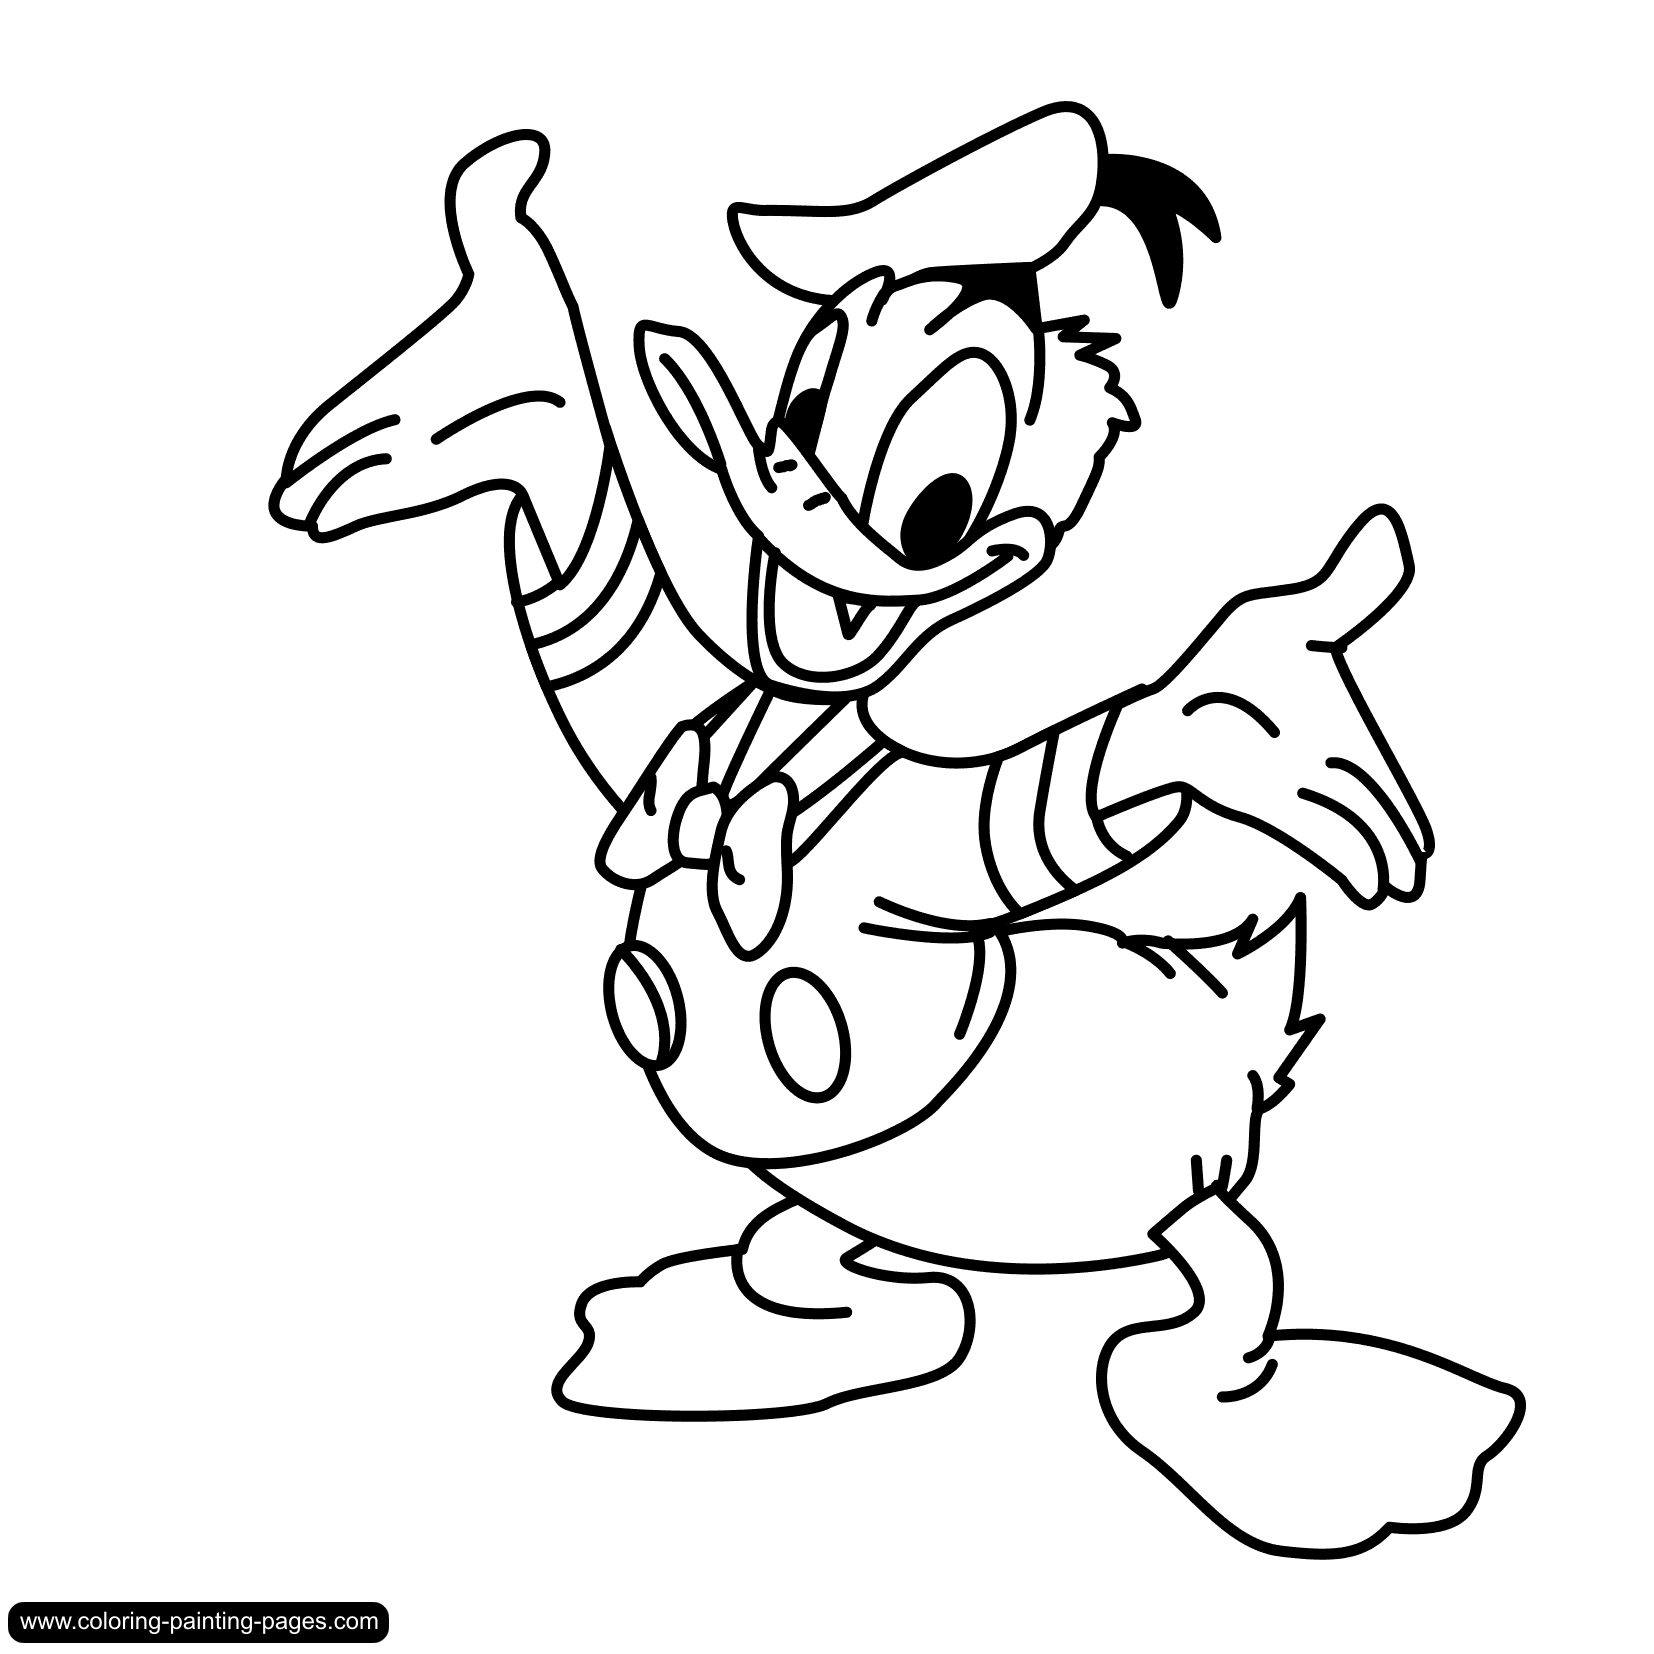 coloring pages of donald duck coloring blog for kids donald duck coloring pages pages donald coloring duck of 